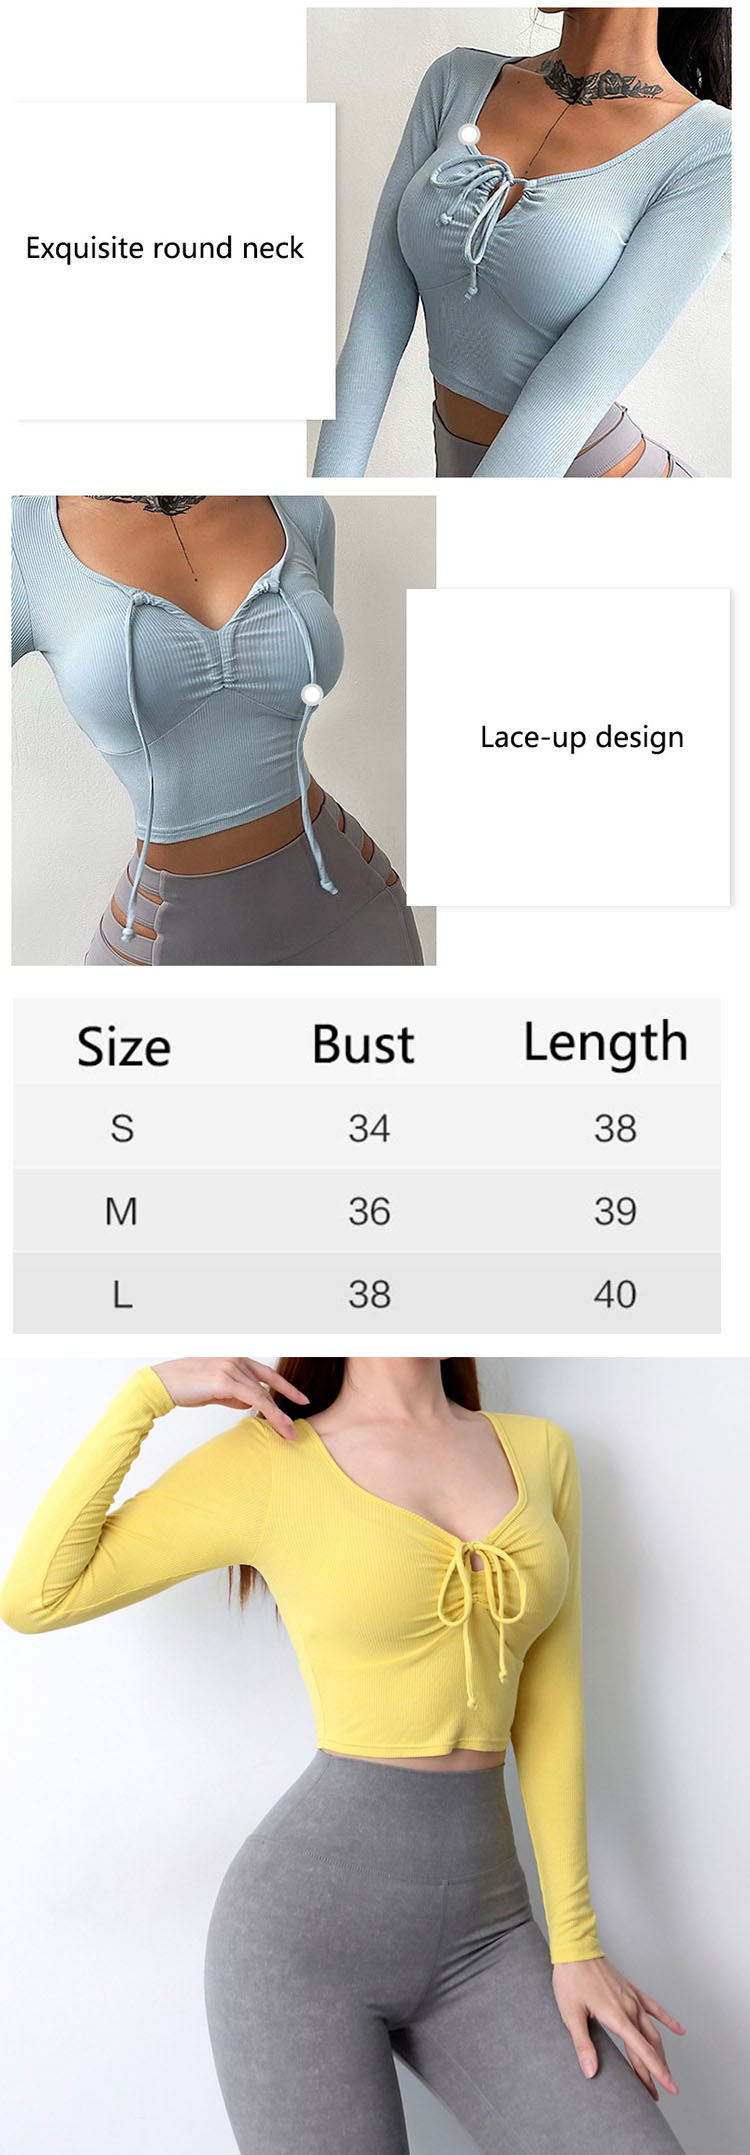 The V neck baseball tee strap design similar to the shoe upper is a functional design element